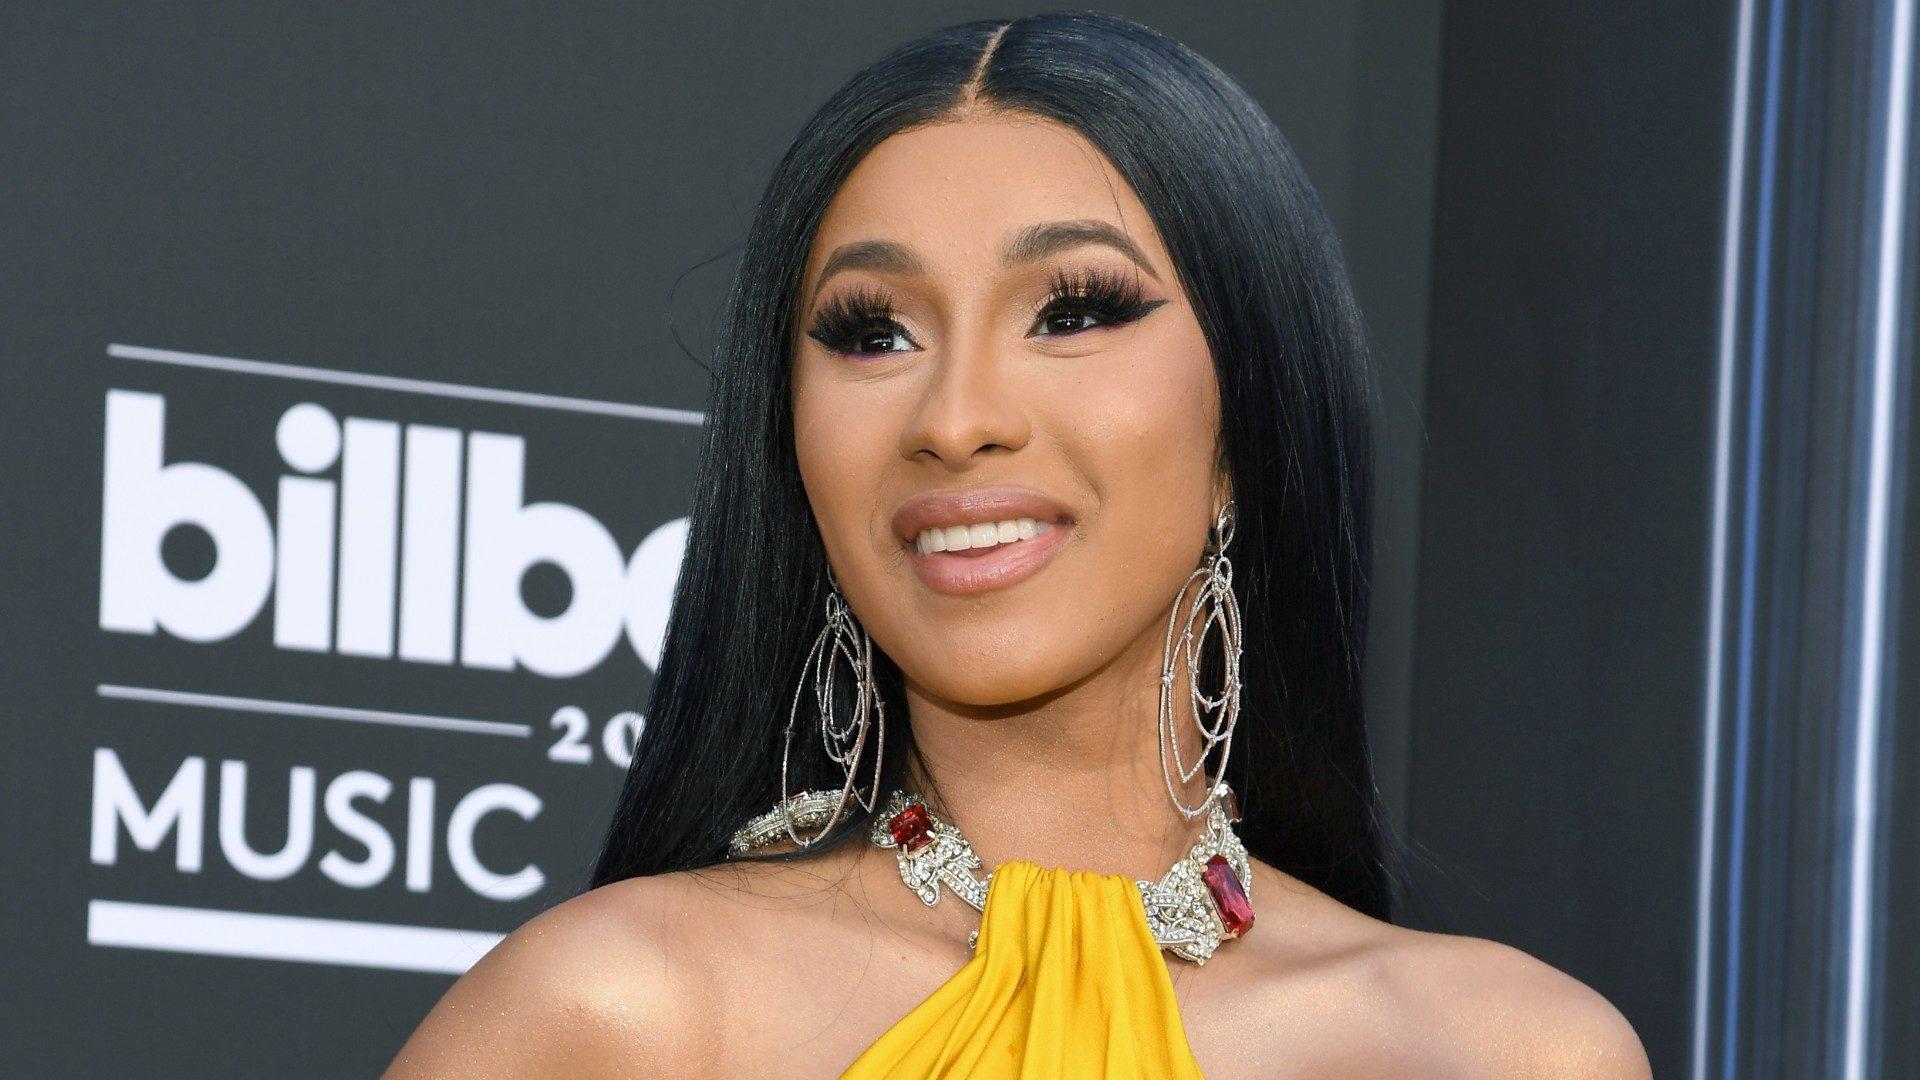 Cardi B May Be Starting A Beauty Trend With Her 'Press' Video